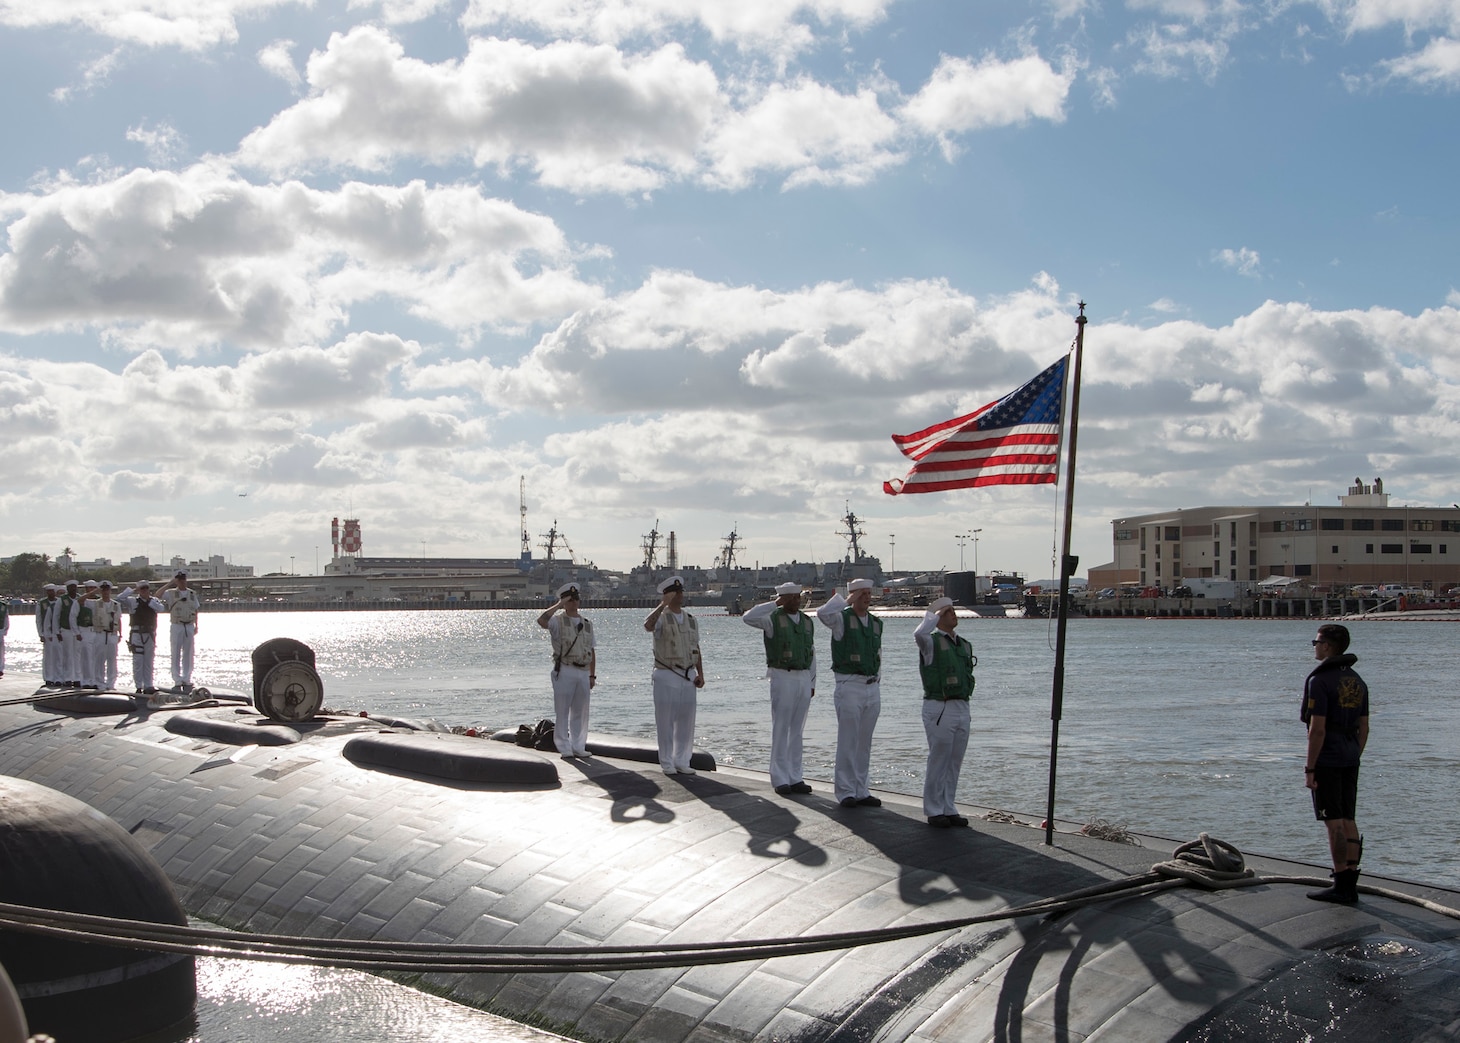 161103-N-LY160-124 JOINT BASE PEARL HARBOR-HICKAM, Hawaii (November 3, 2016) Sailors assigned to the Los Angeles-class fast-attack submarine USS Greeneville (SSN 772) salute the ensign following the completion of her six-month deployment to the Western Pacific Ocean in Joint Base Pearl Harbor-Hickam. (U.S. Navy photo by Petty Officer 2nd Class Michael H. Lee/Released)